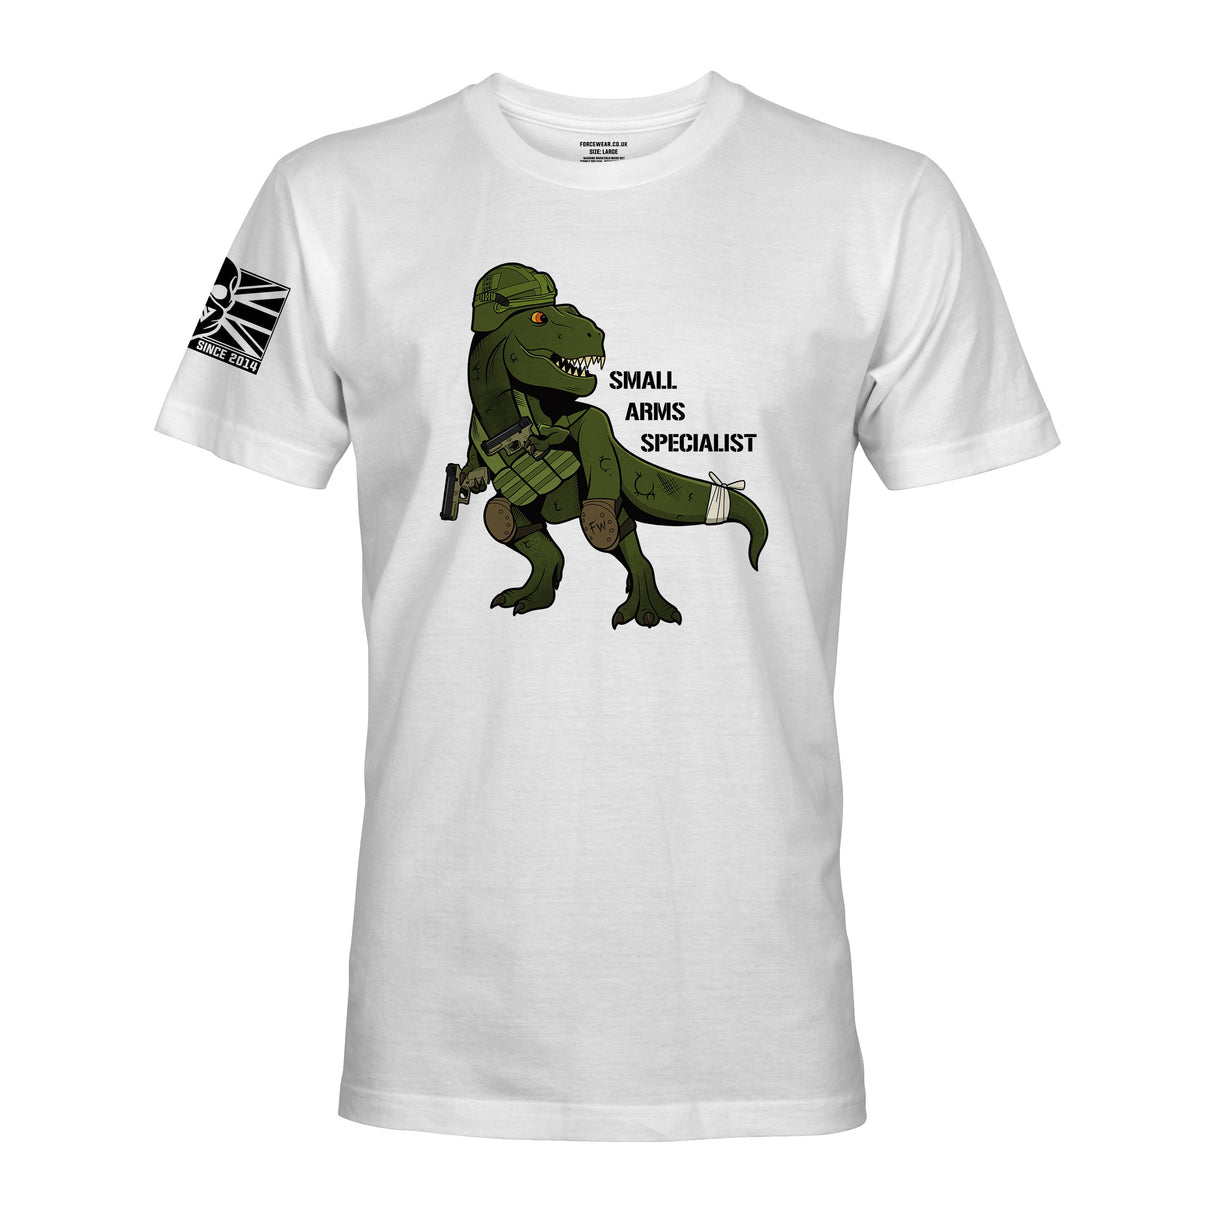 SMALL ARMS SPECIALIST - Force Wear HQ - T-SHIRTS